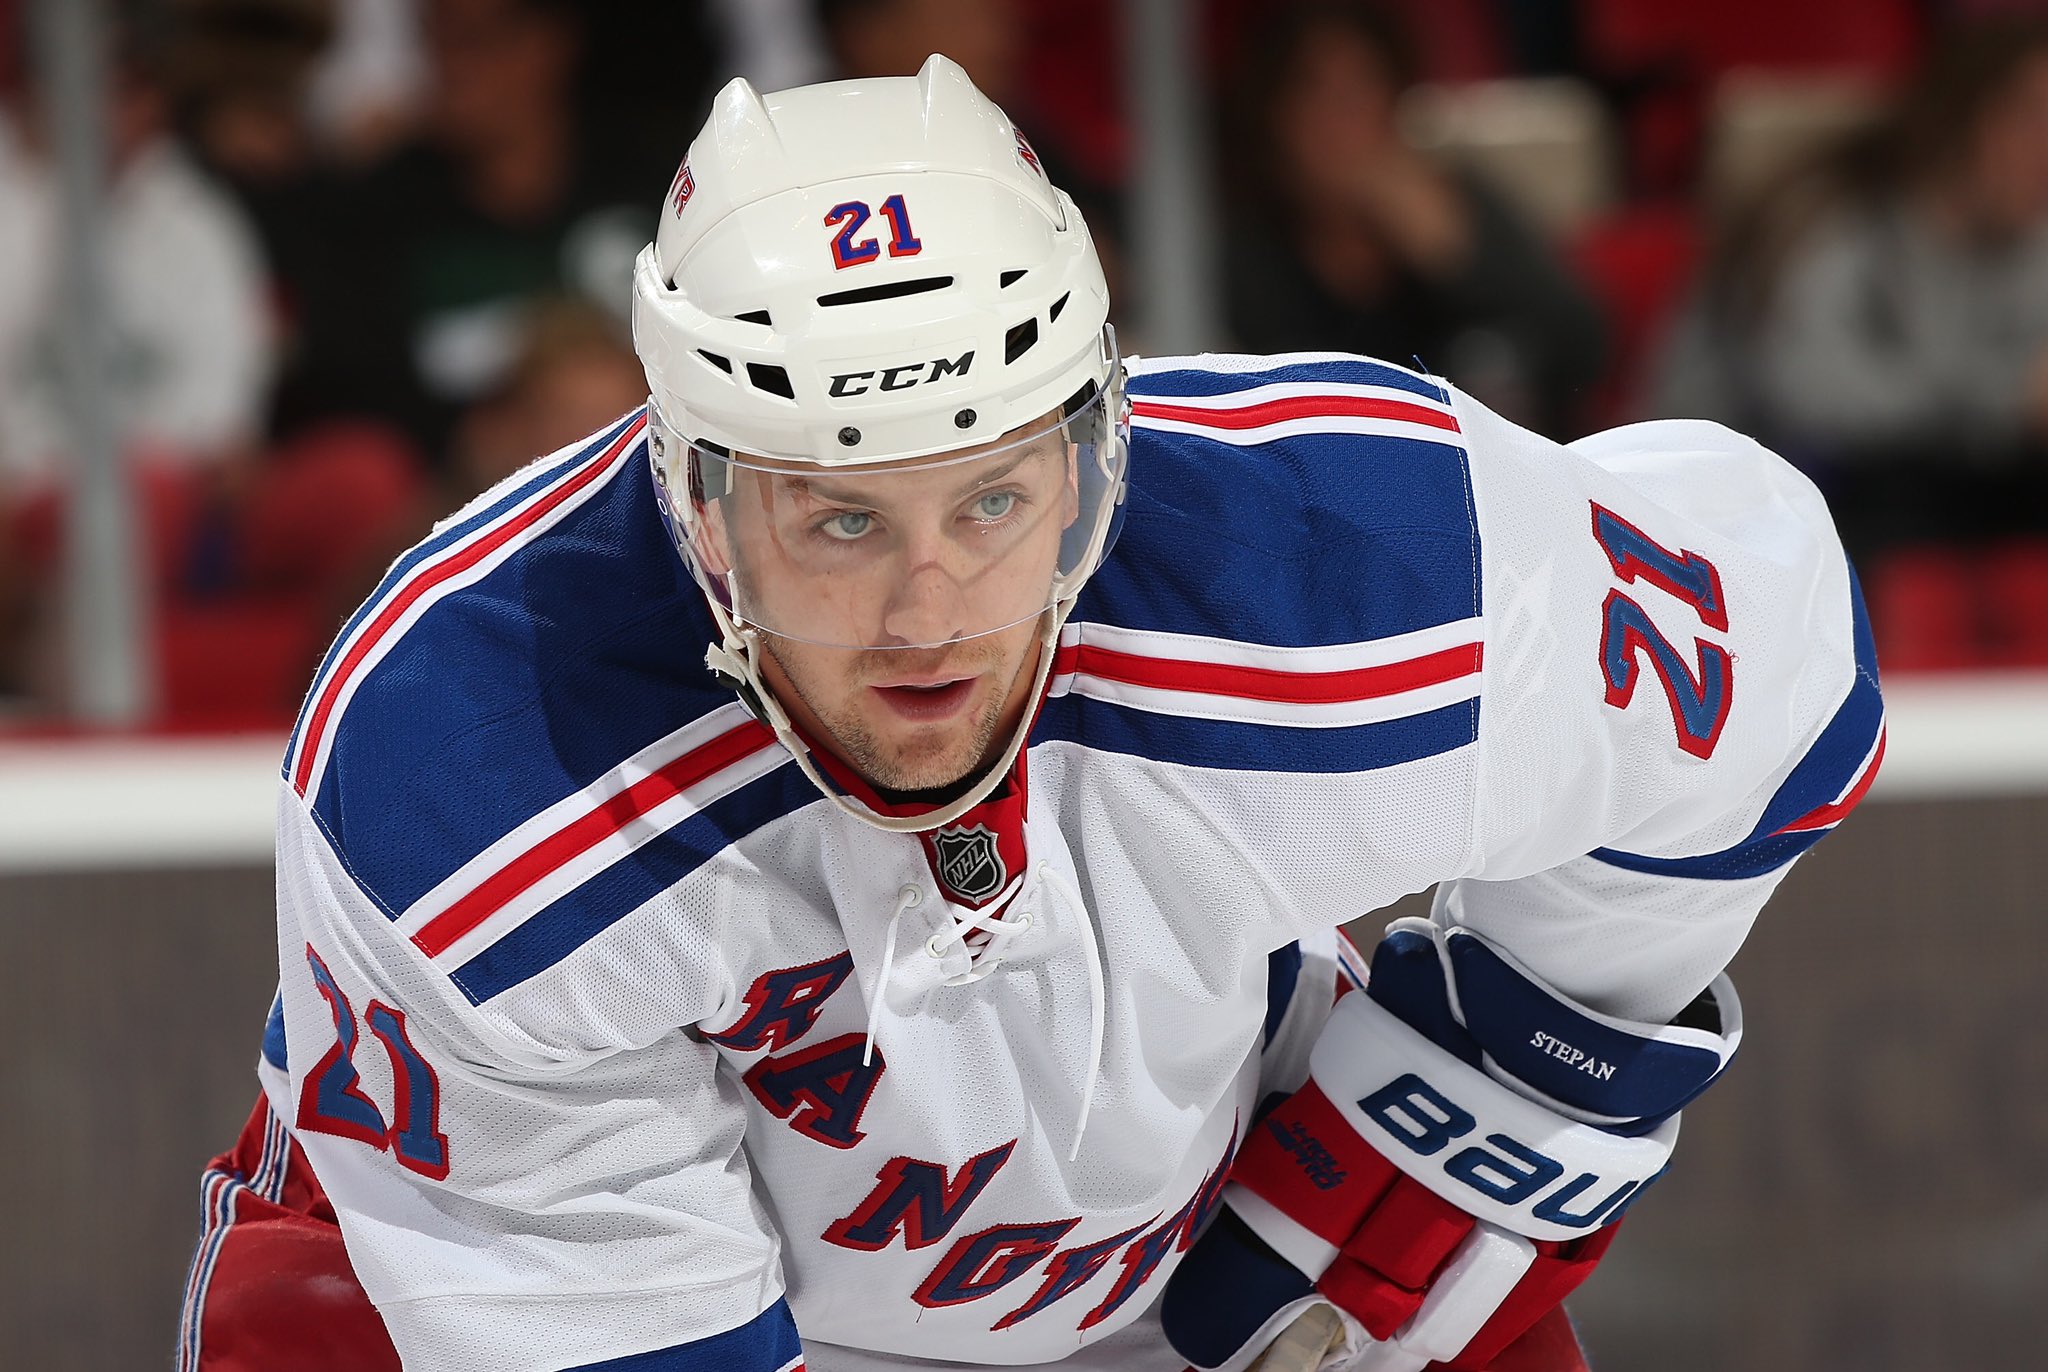 Stepan retires from NHL after 13 seasons